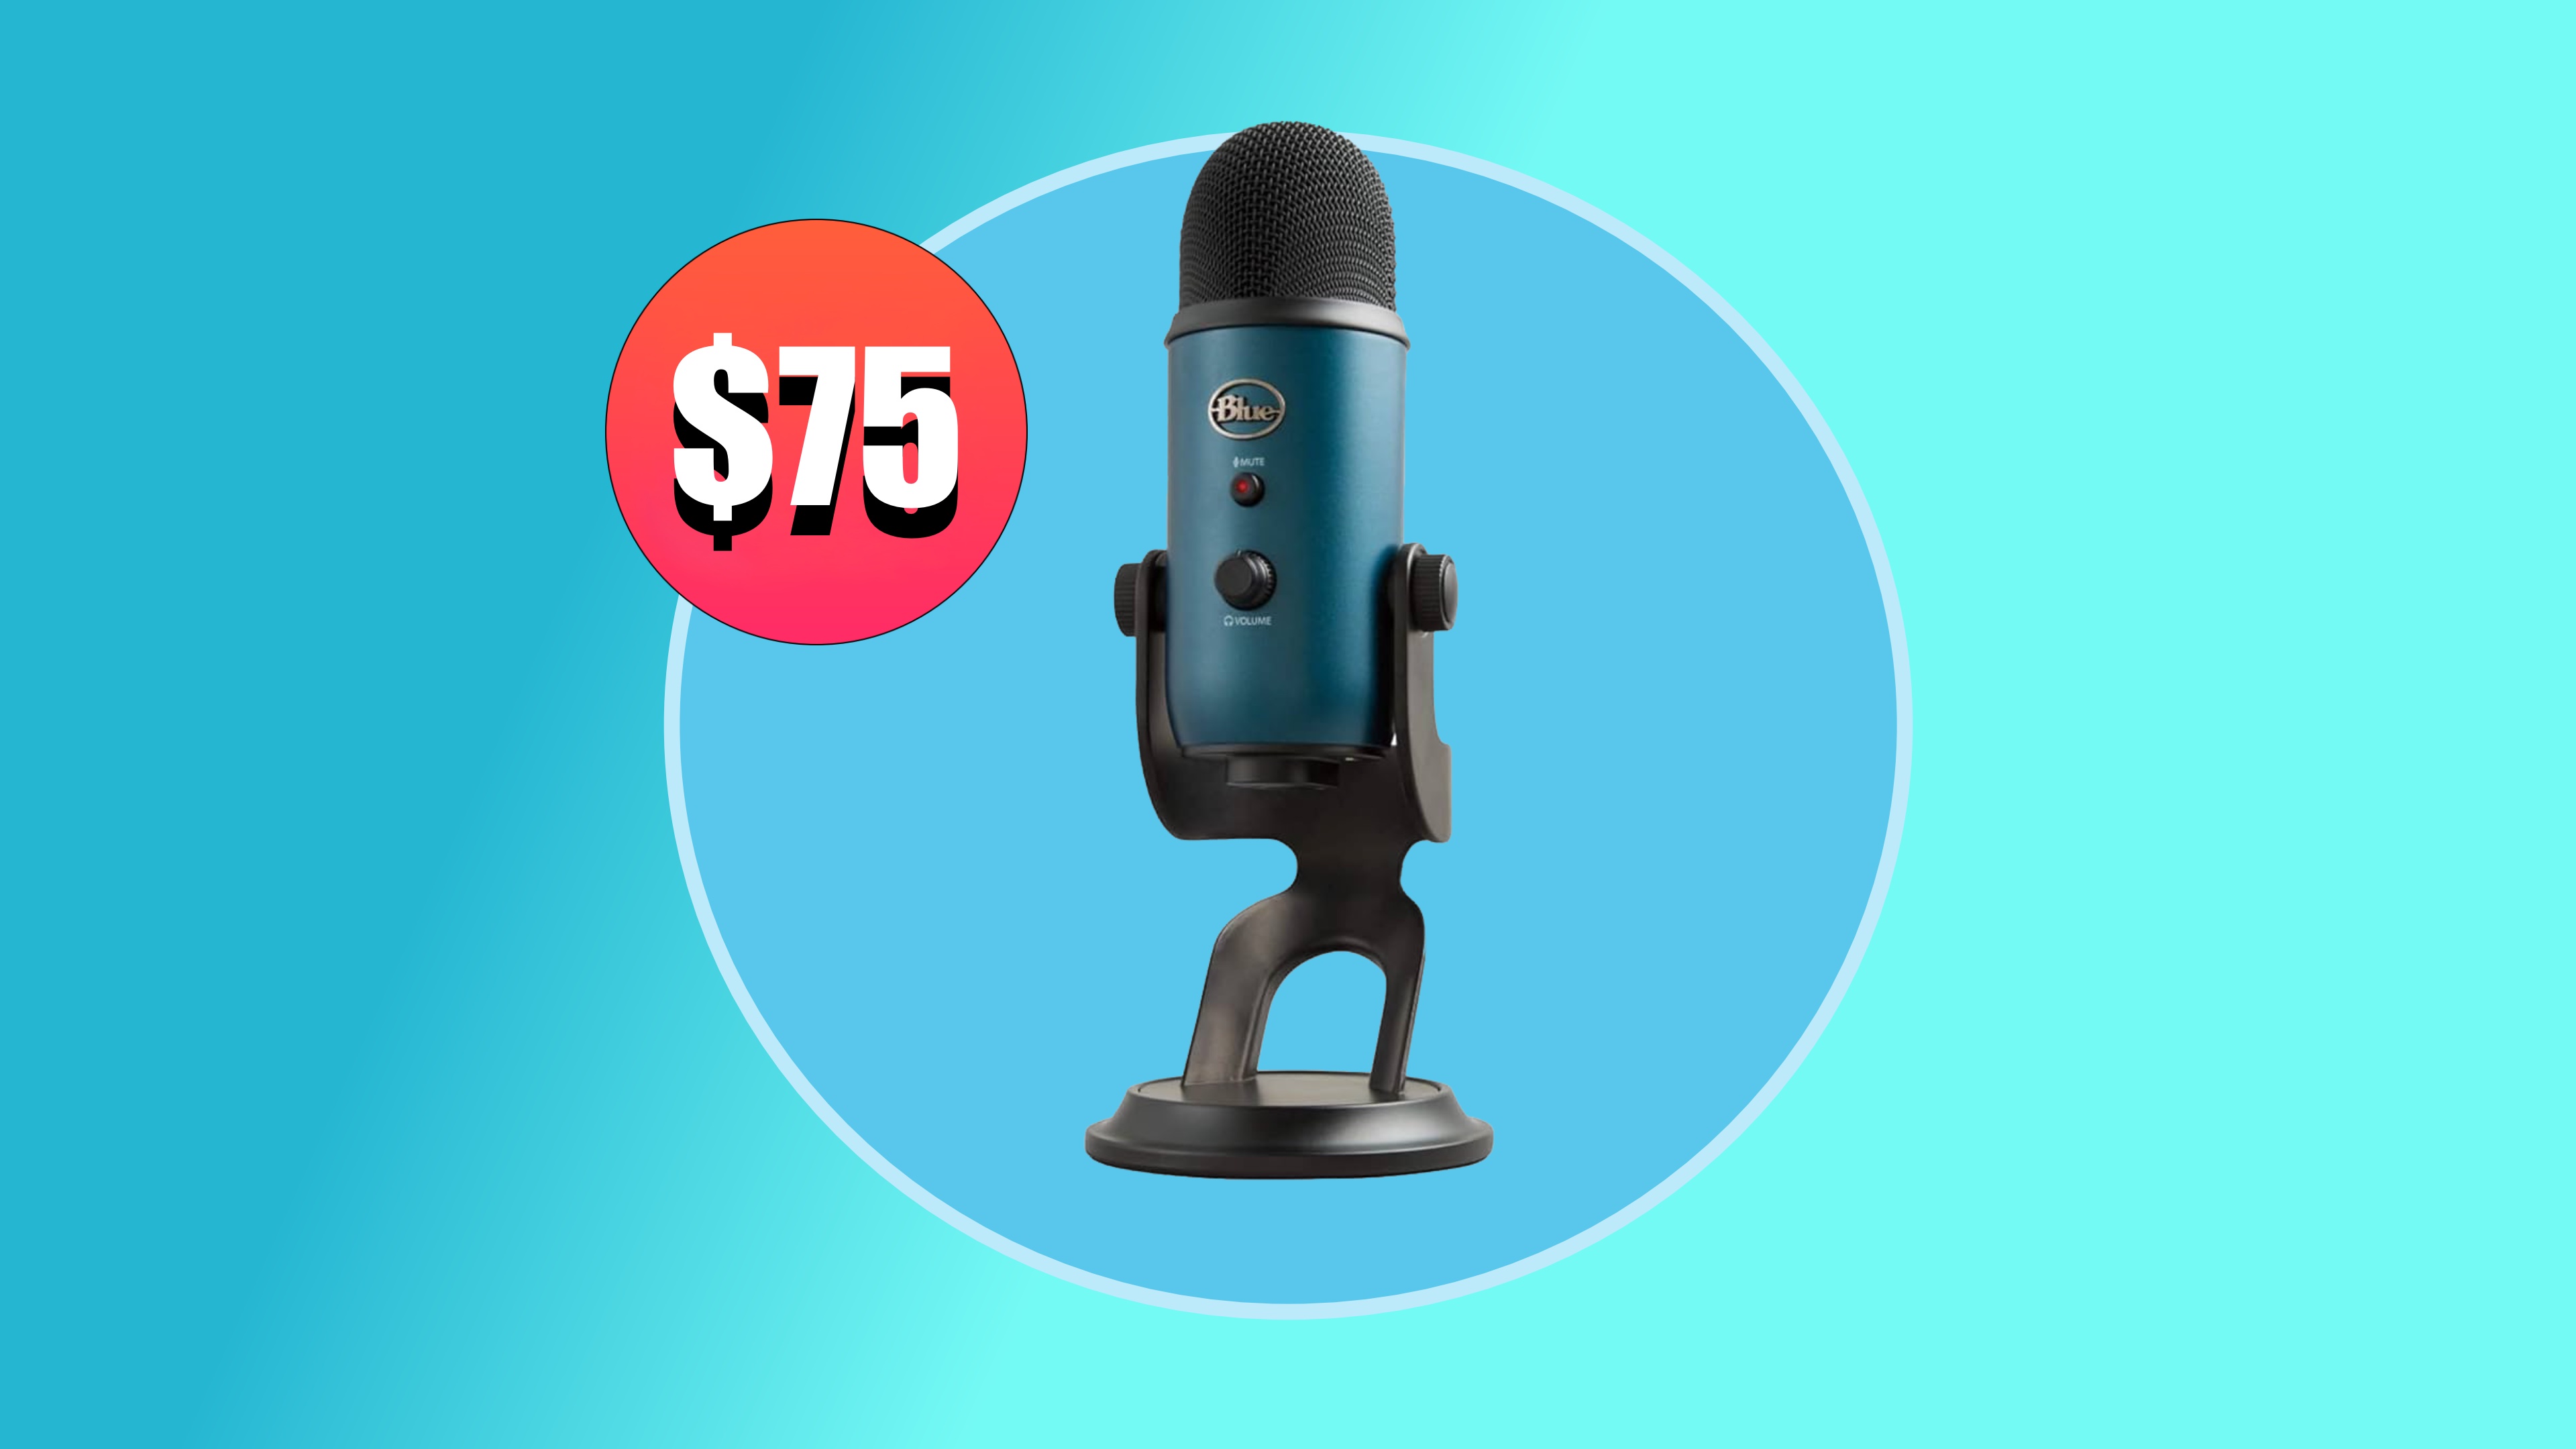 Our favorite USB mic for streamers and musicians is on sale for an all-time low $75